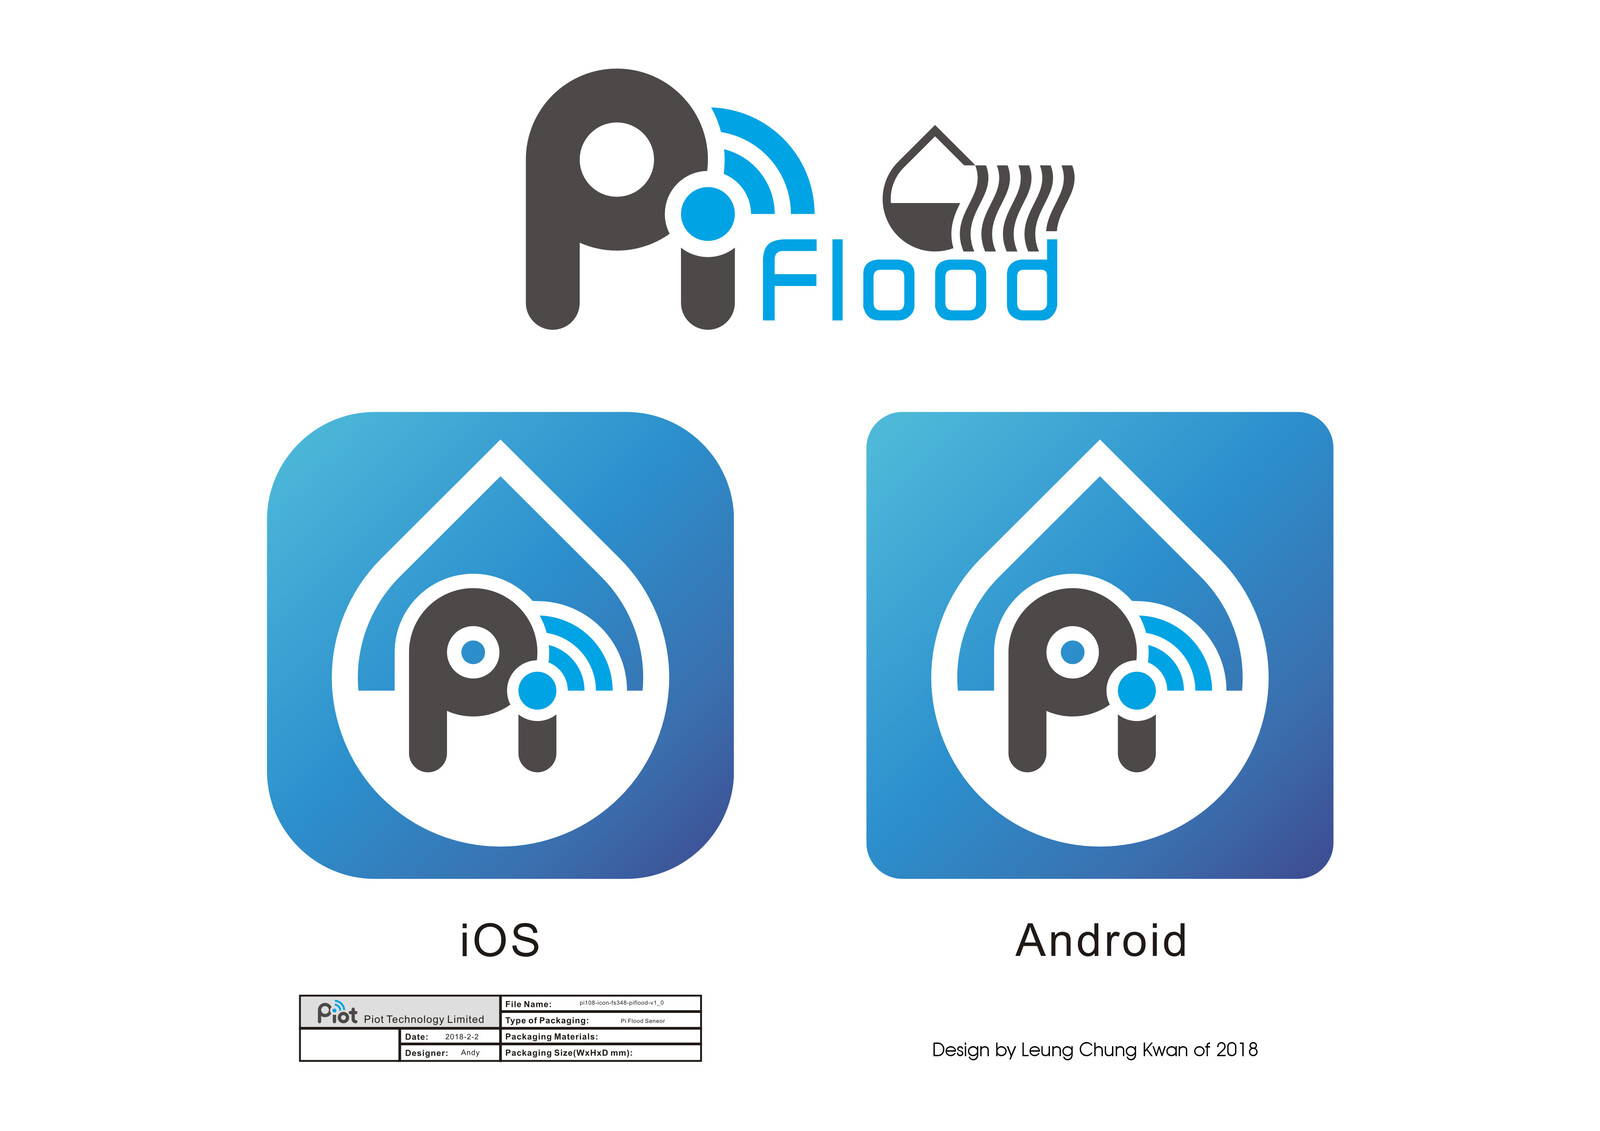 💎 App Icon | Design by Leung Chung Kwan on 2018 💎
App Name︰Piflood | Client︰Piot  Technology Limited